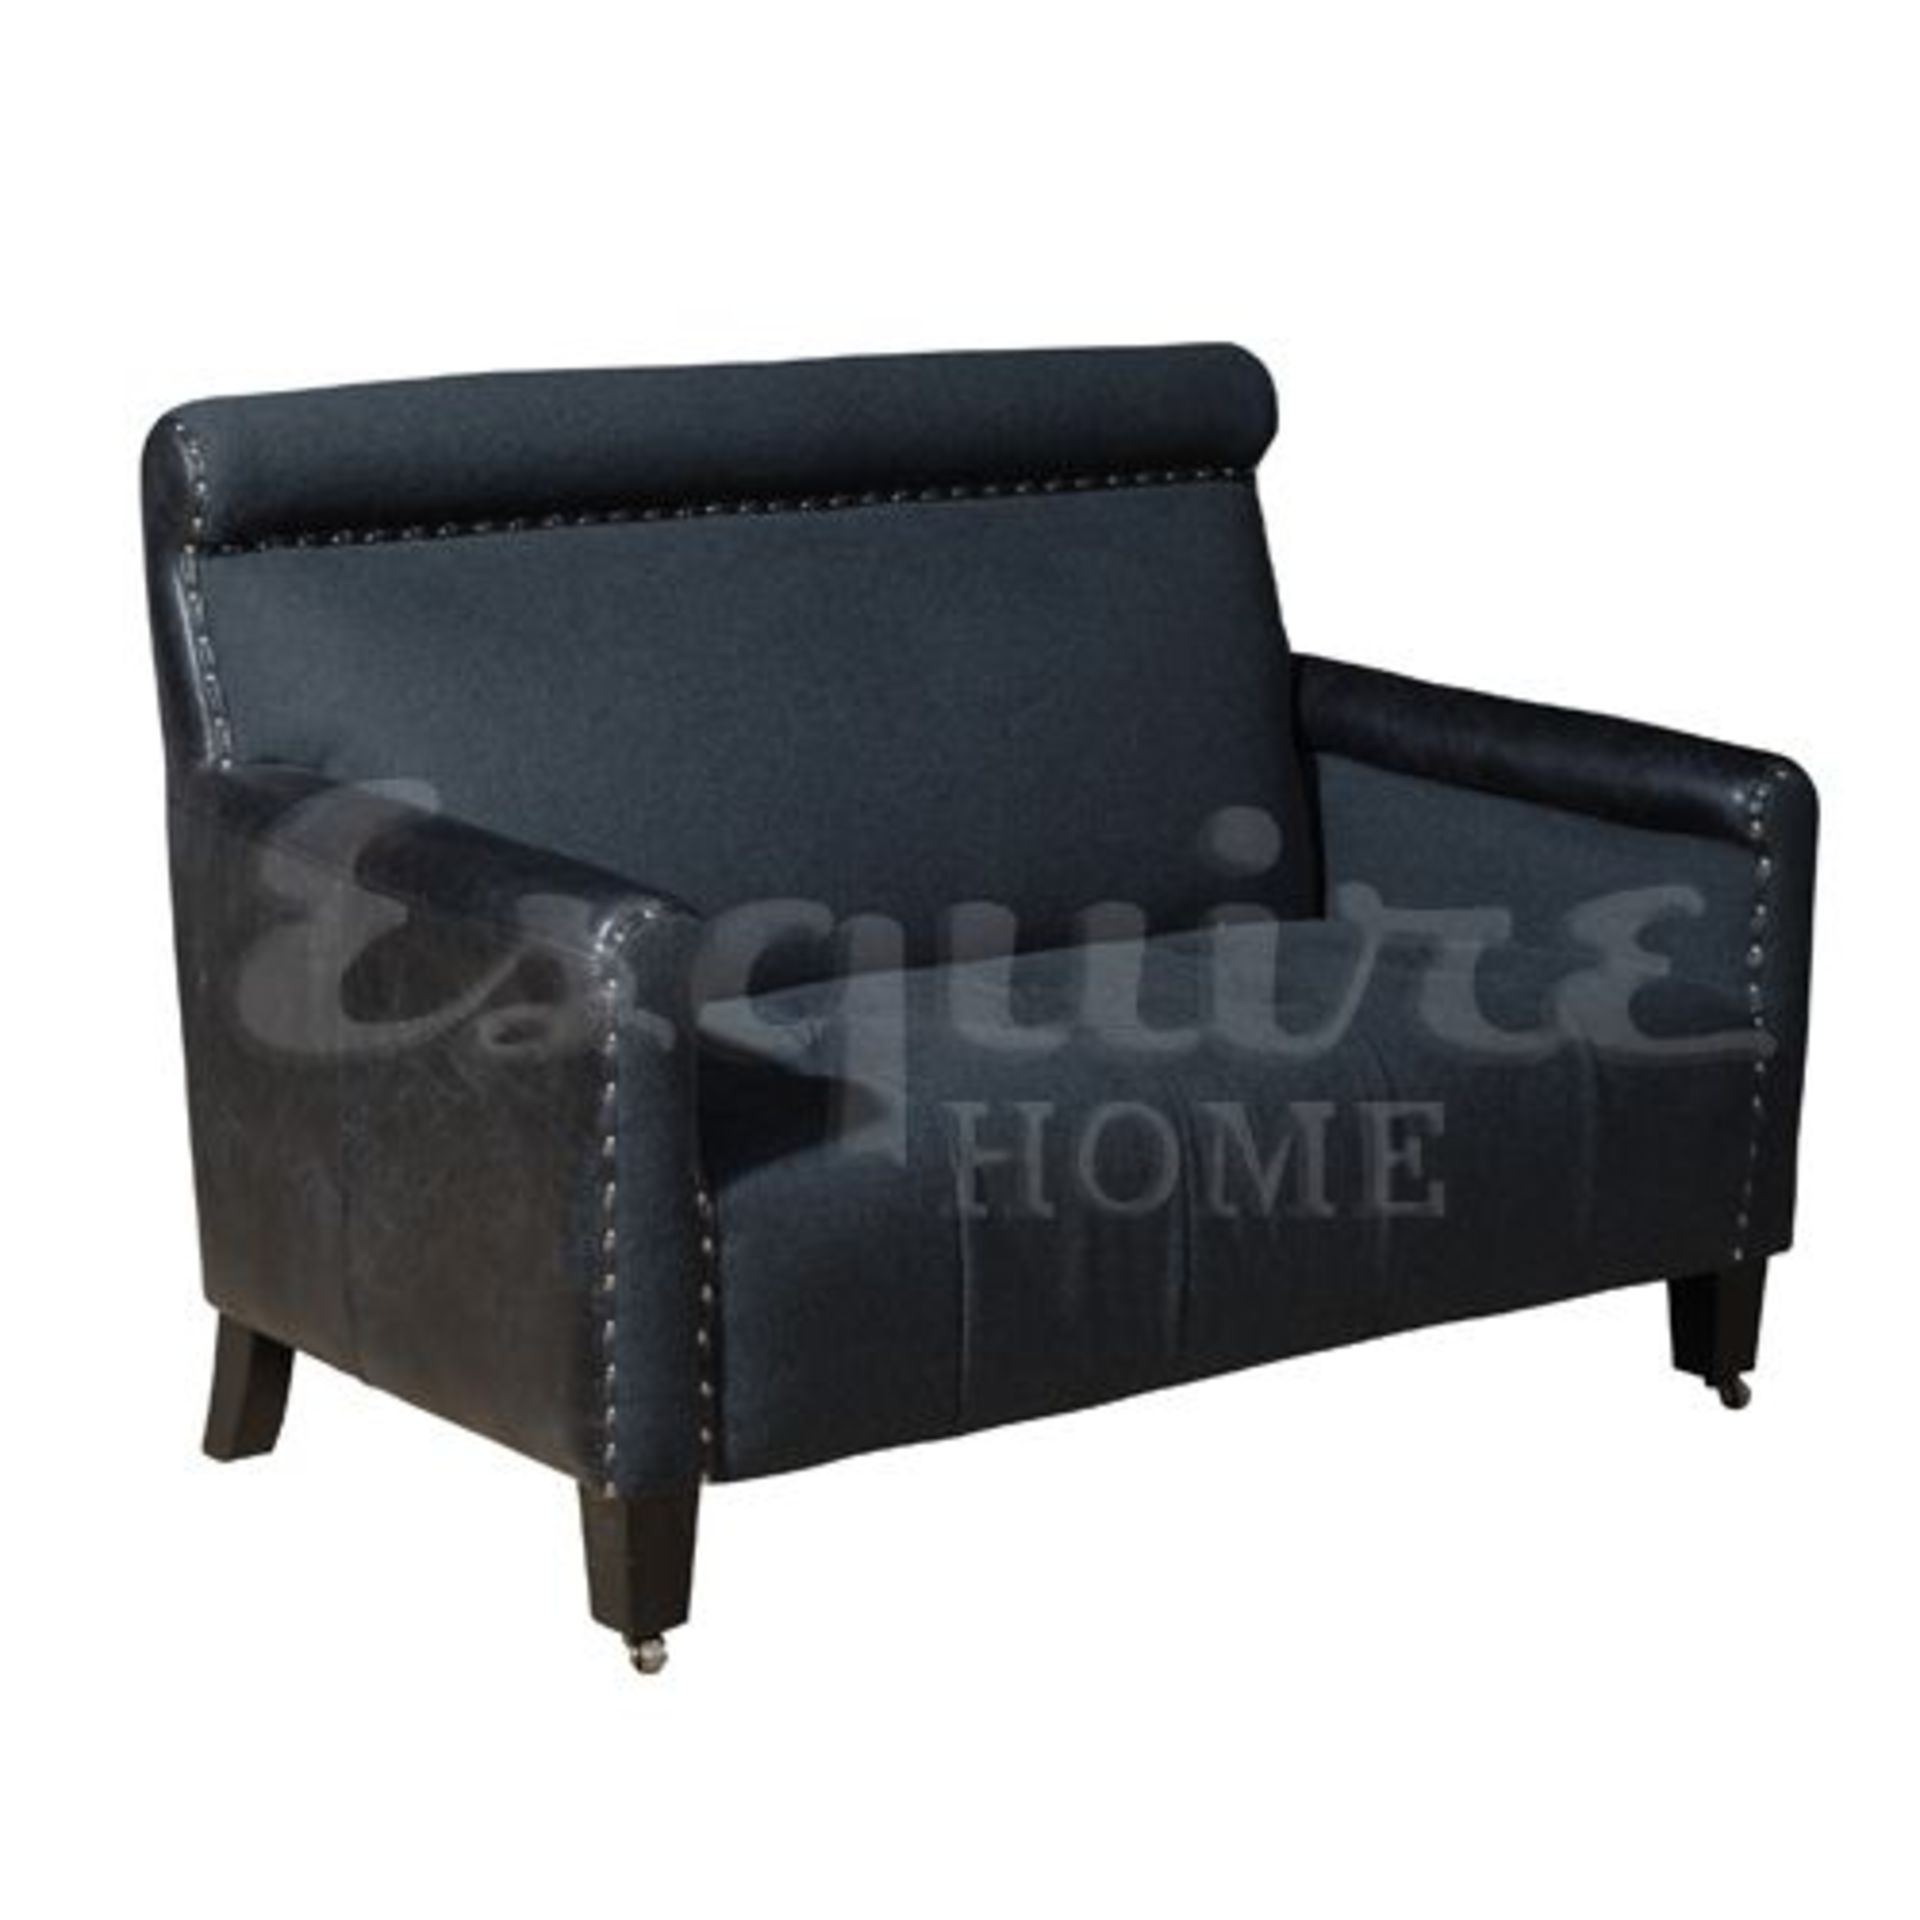 Commodore Armchair Black Leather Charcoal Wool 78 X 85 X 97cm - Image 2 of 2